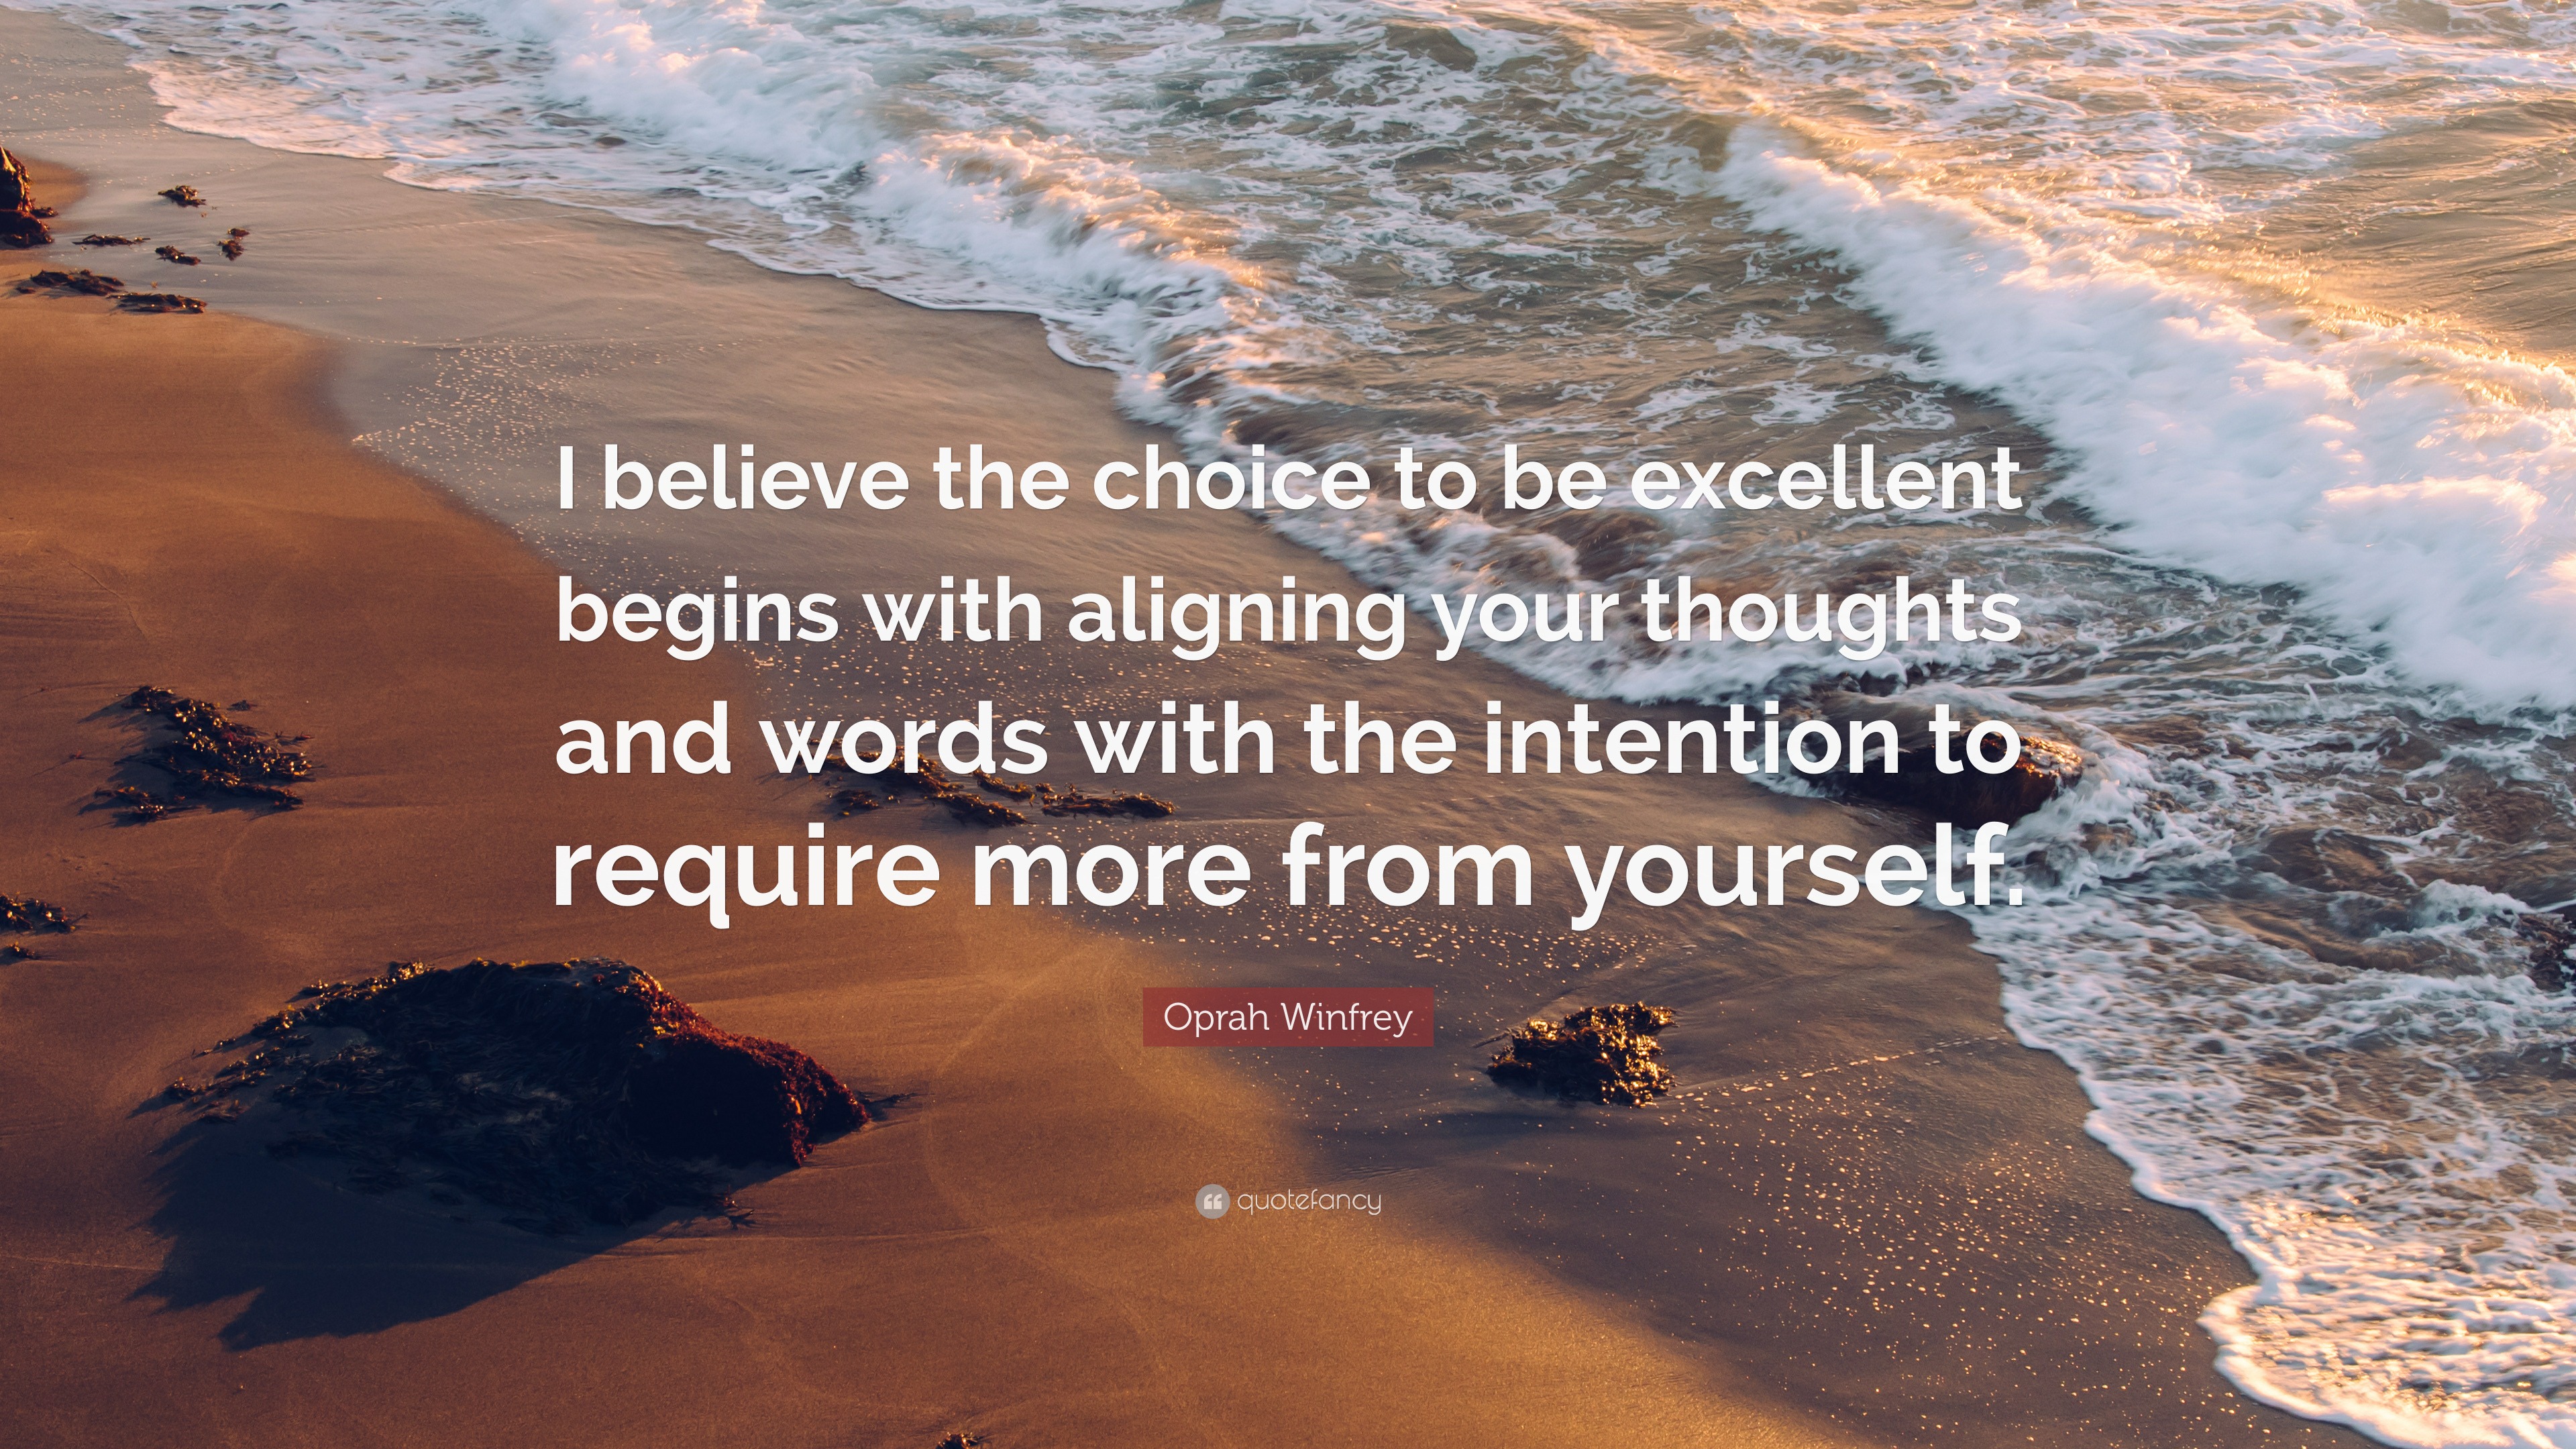 Oprah Winfrey Quote: “I believe the choice to be excellent begins with ...